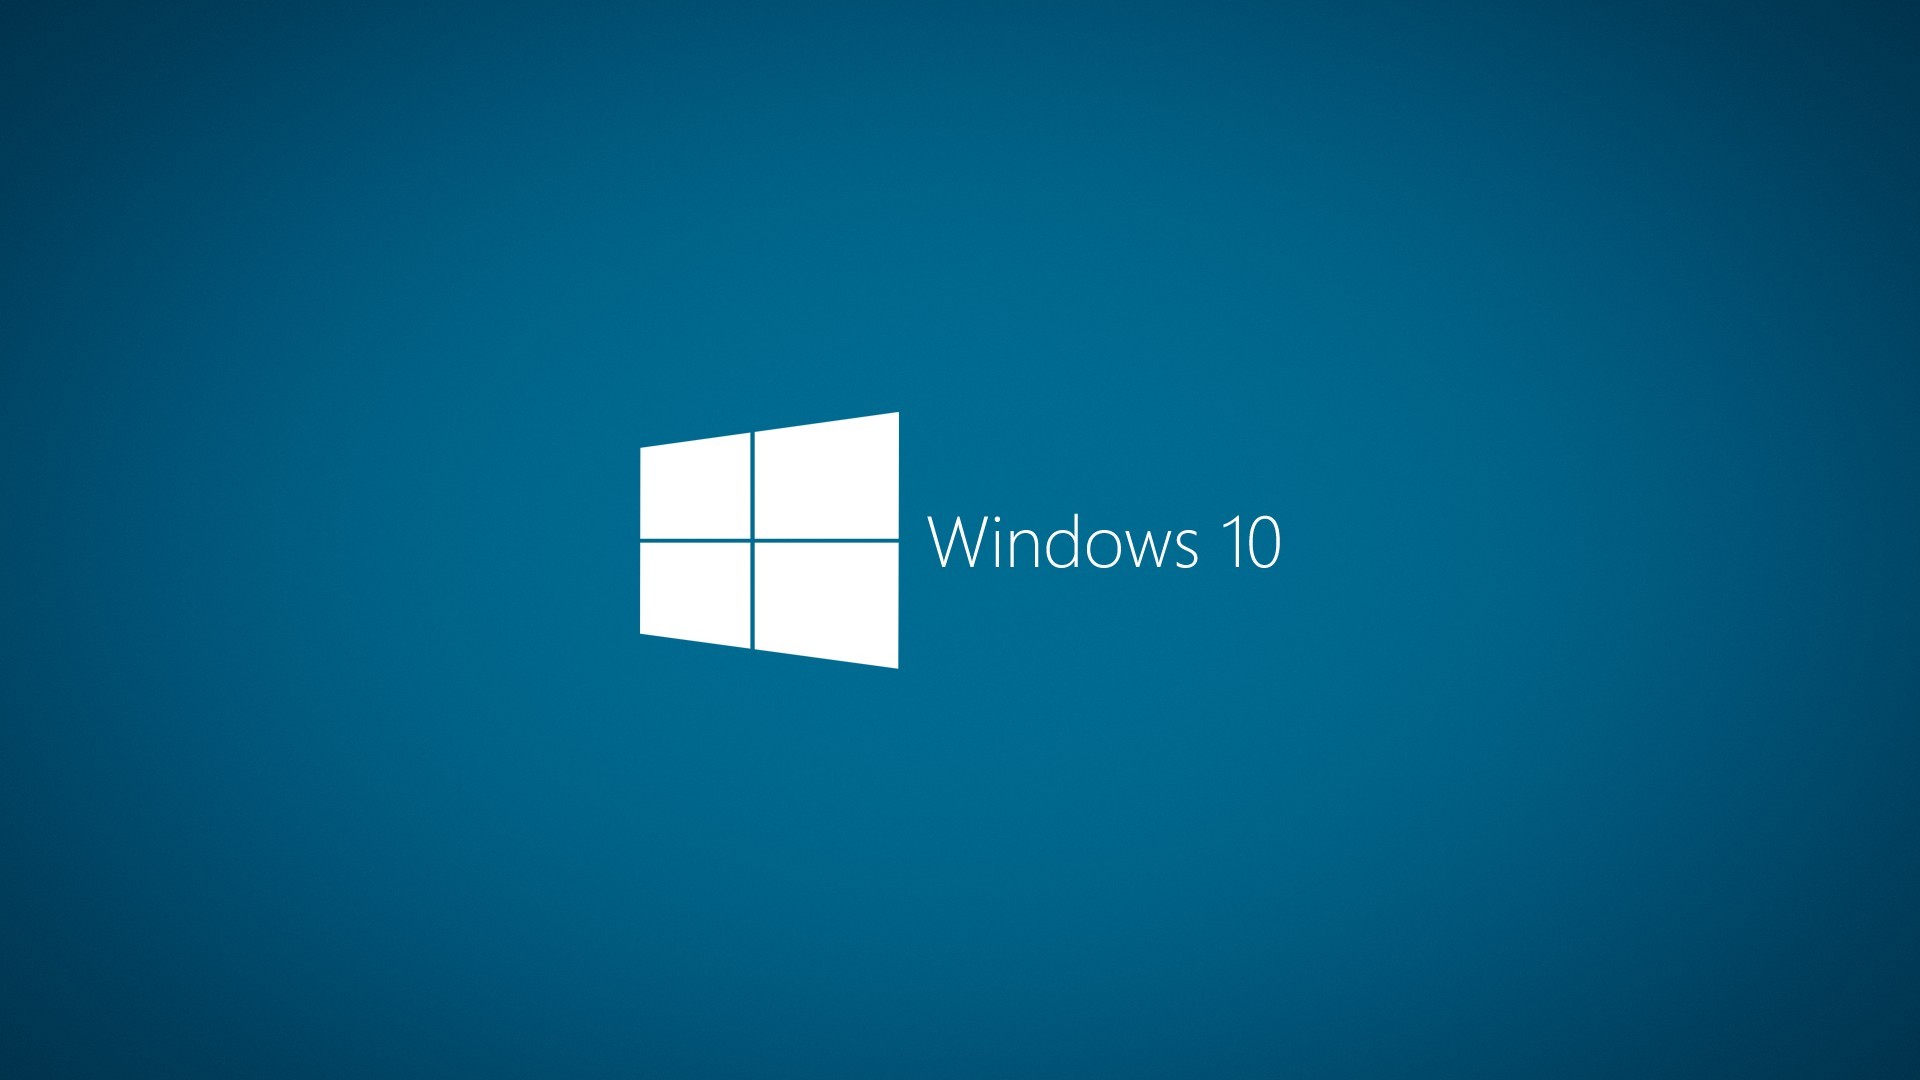 Windows 10 Background Wallpaper HD with high-resolution 1920x1080 pixel. You can use this wallpaper for your Desktop Computer Backgrounds, Mac Wallpapers, Android Lock screen or iPhone Screensavers and another smartphone device